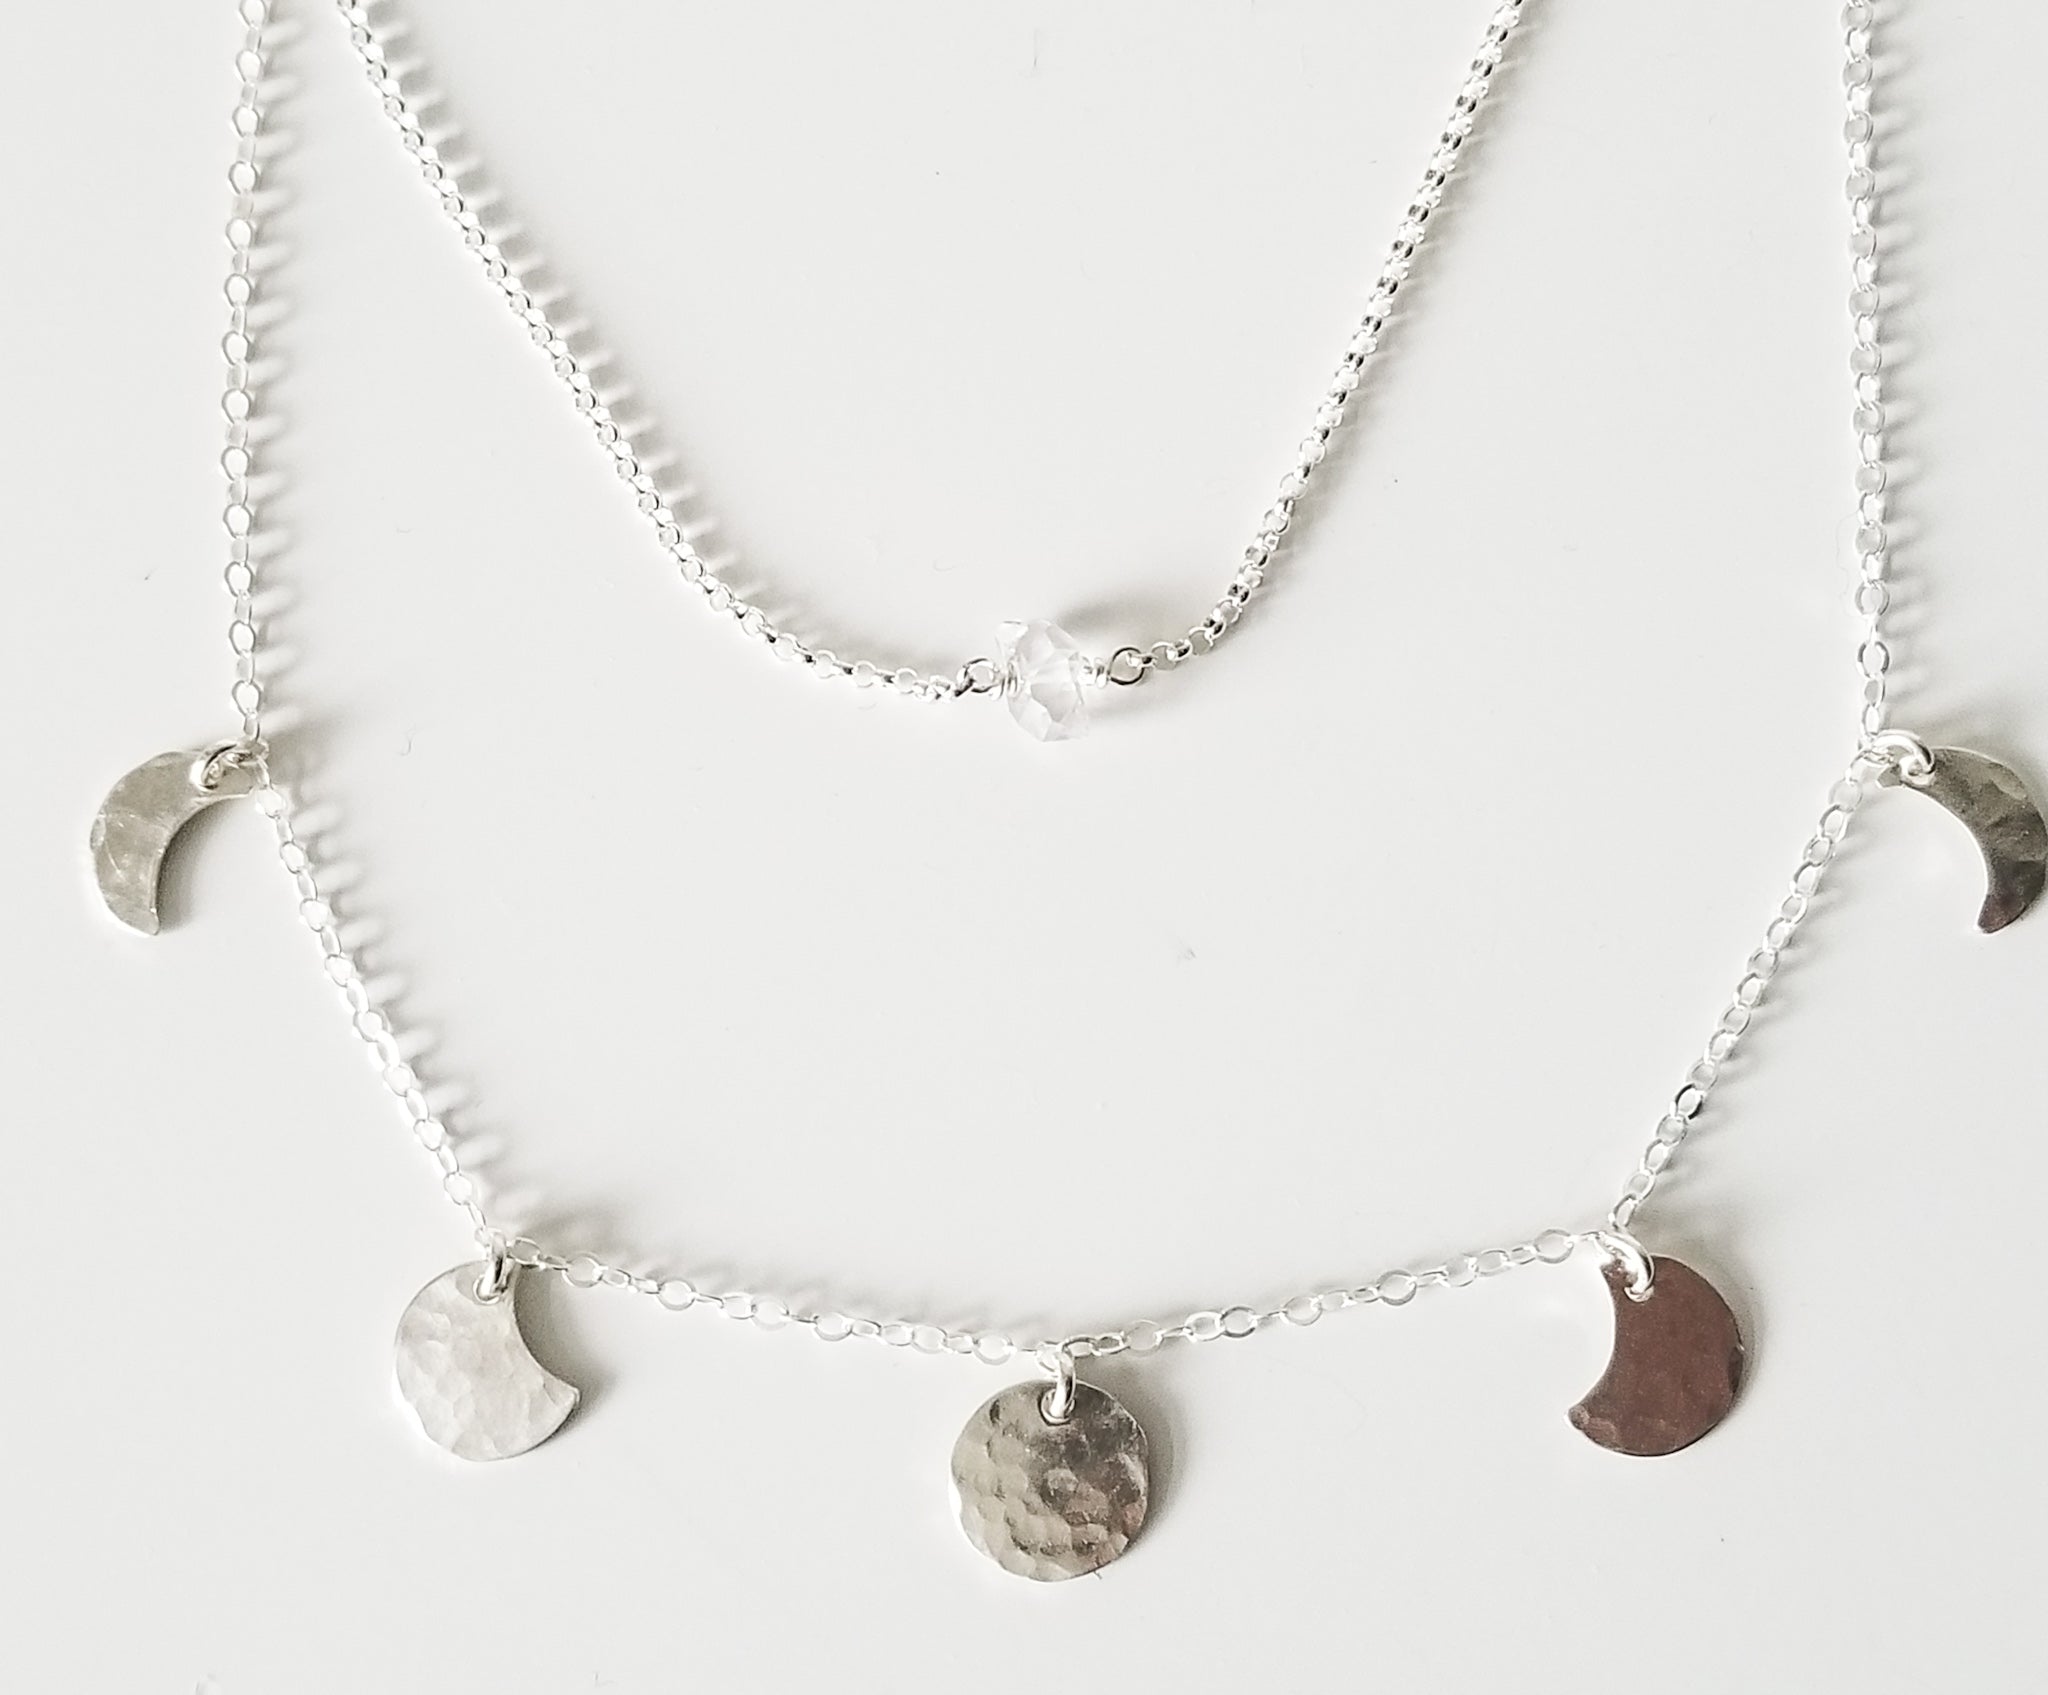 a silver chain necklace with small moon pendants showing the moon phase and a small herkimer diamond on a silver chain with a white background